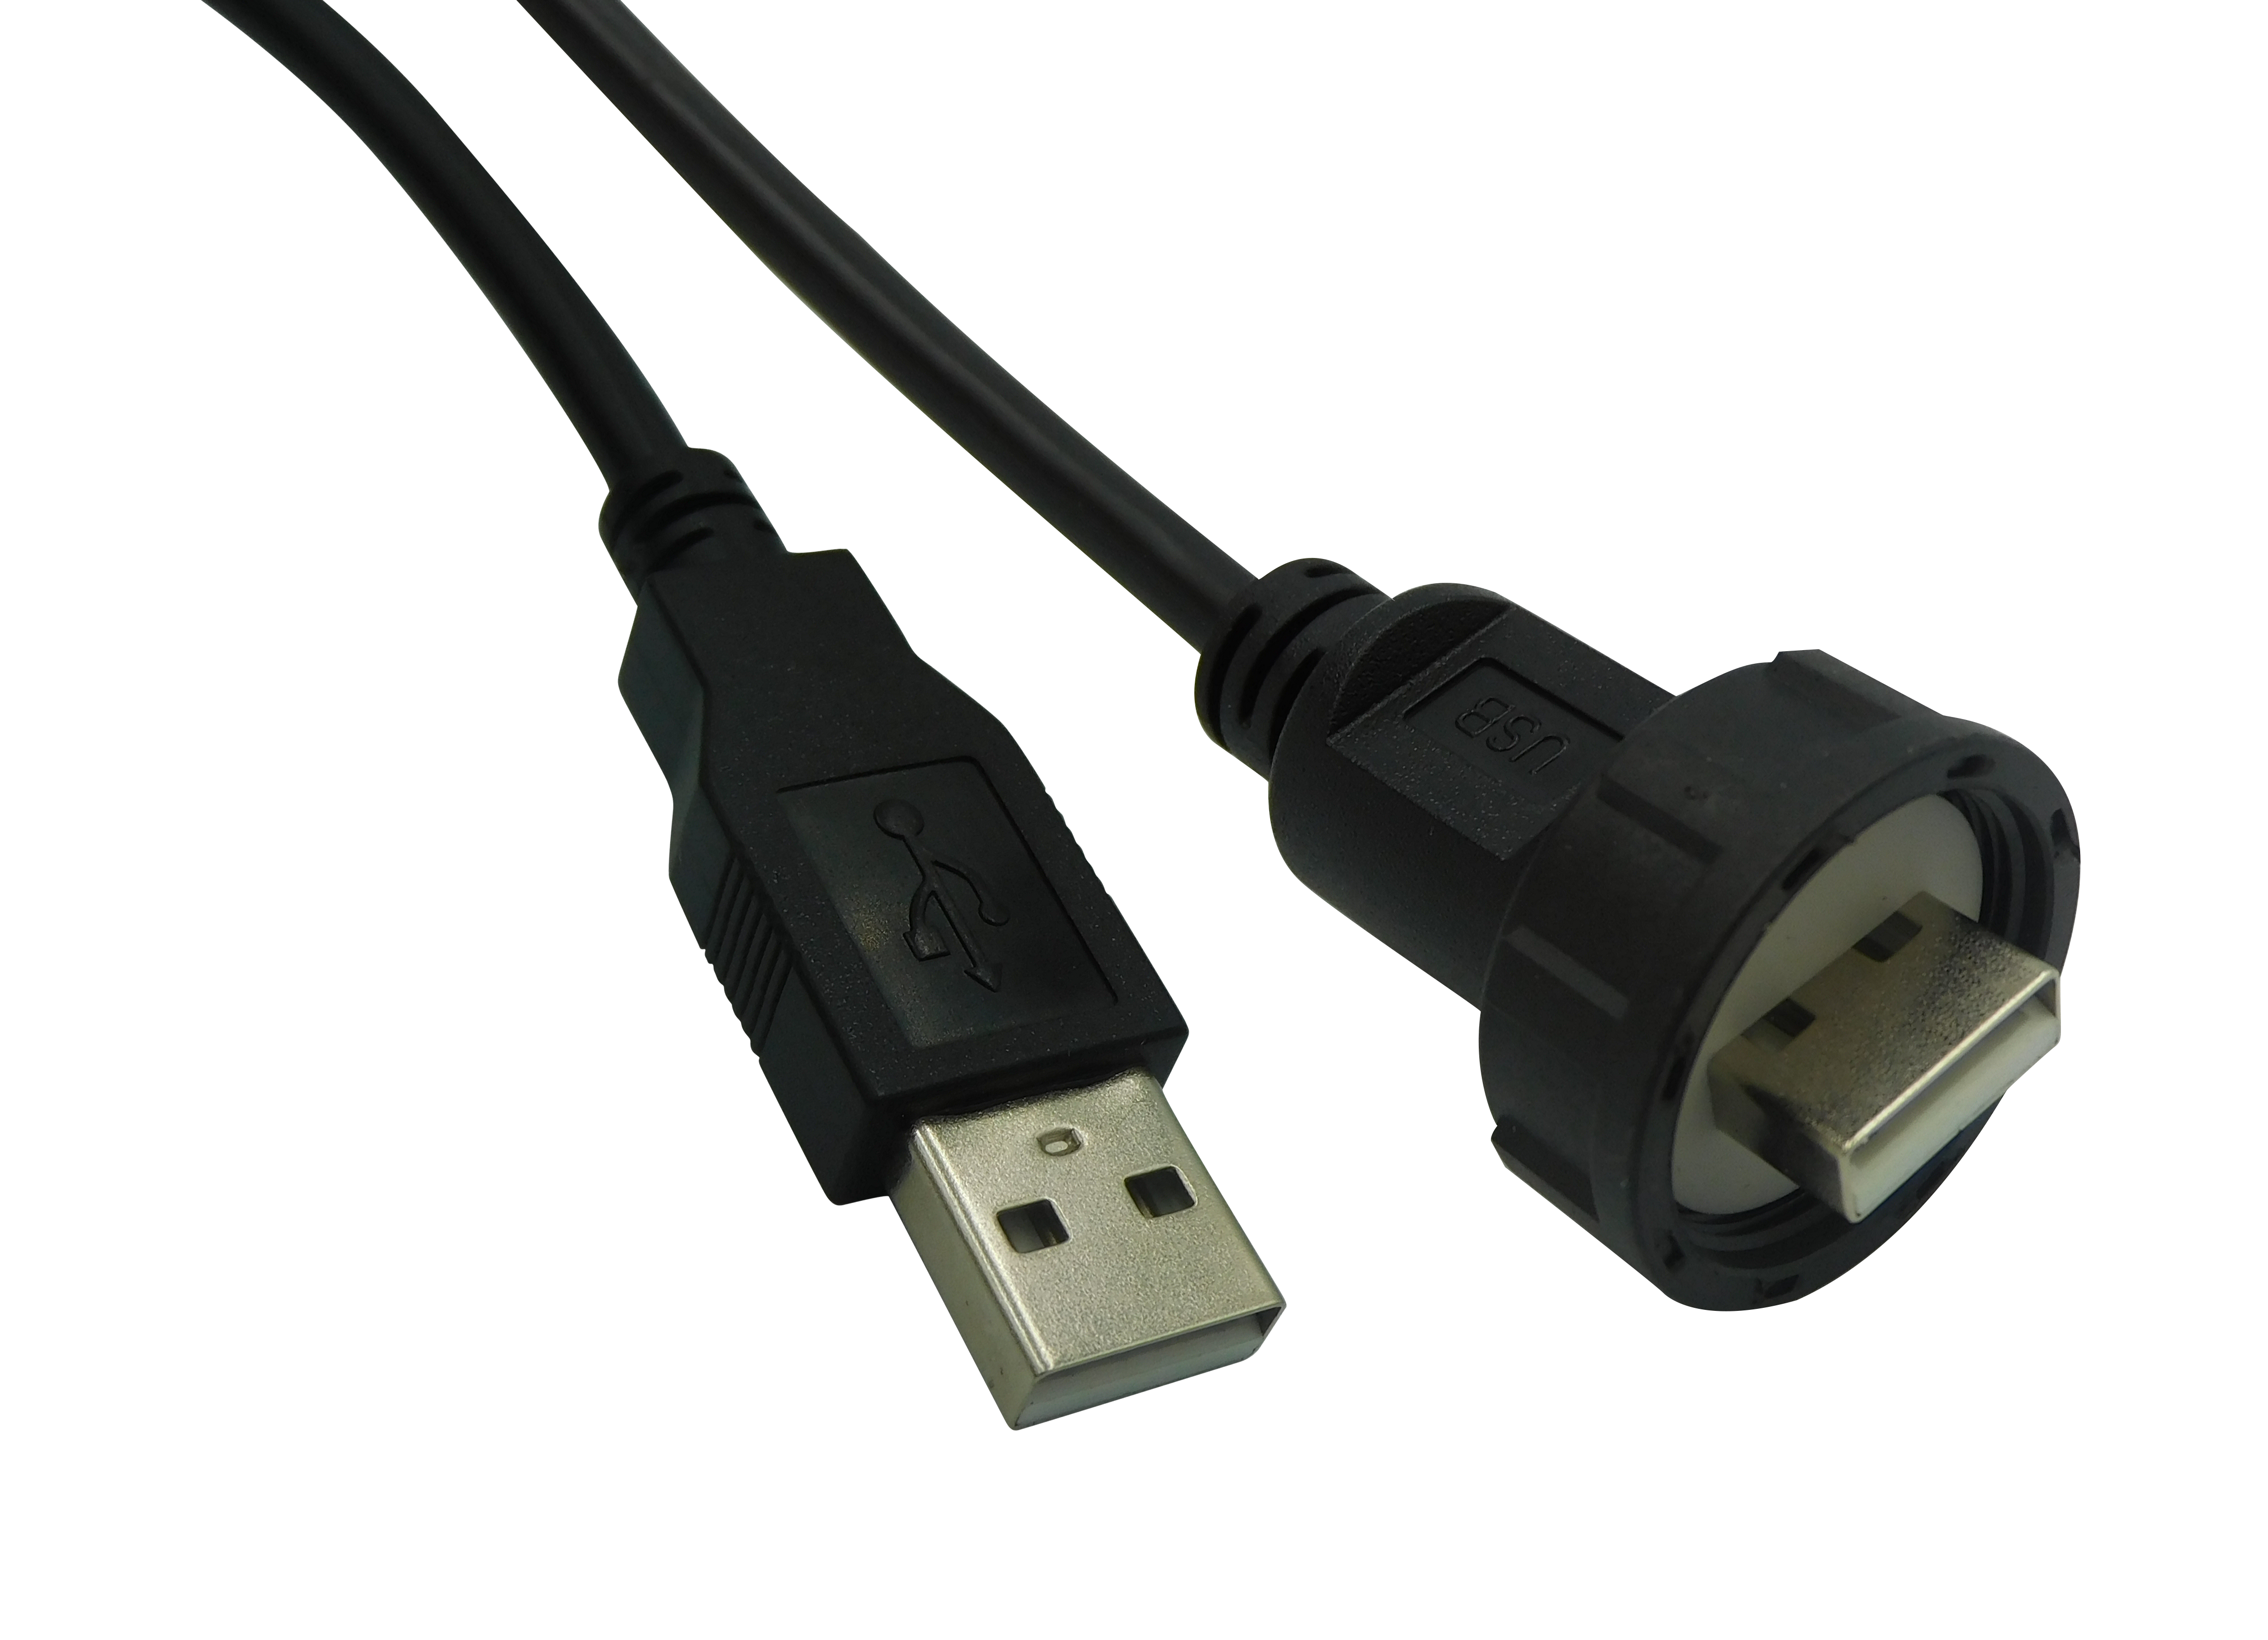 IP67-Rated USB Type-A Cable Assemblies